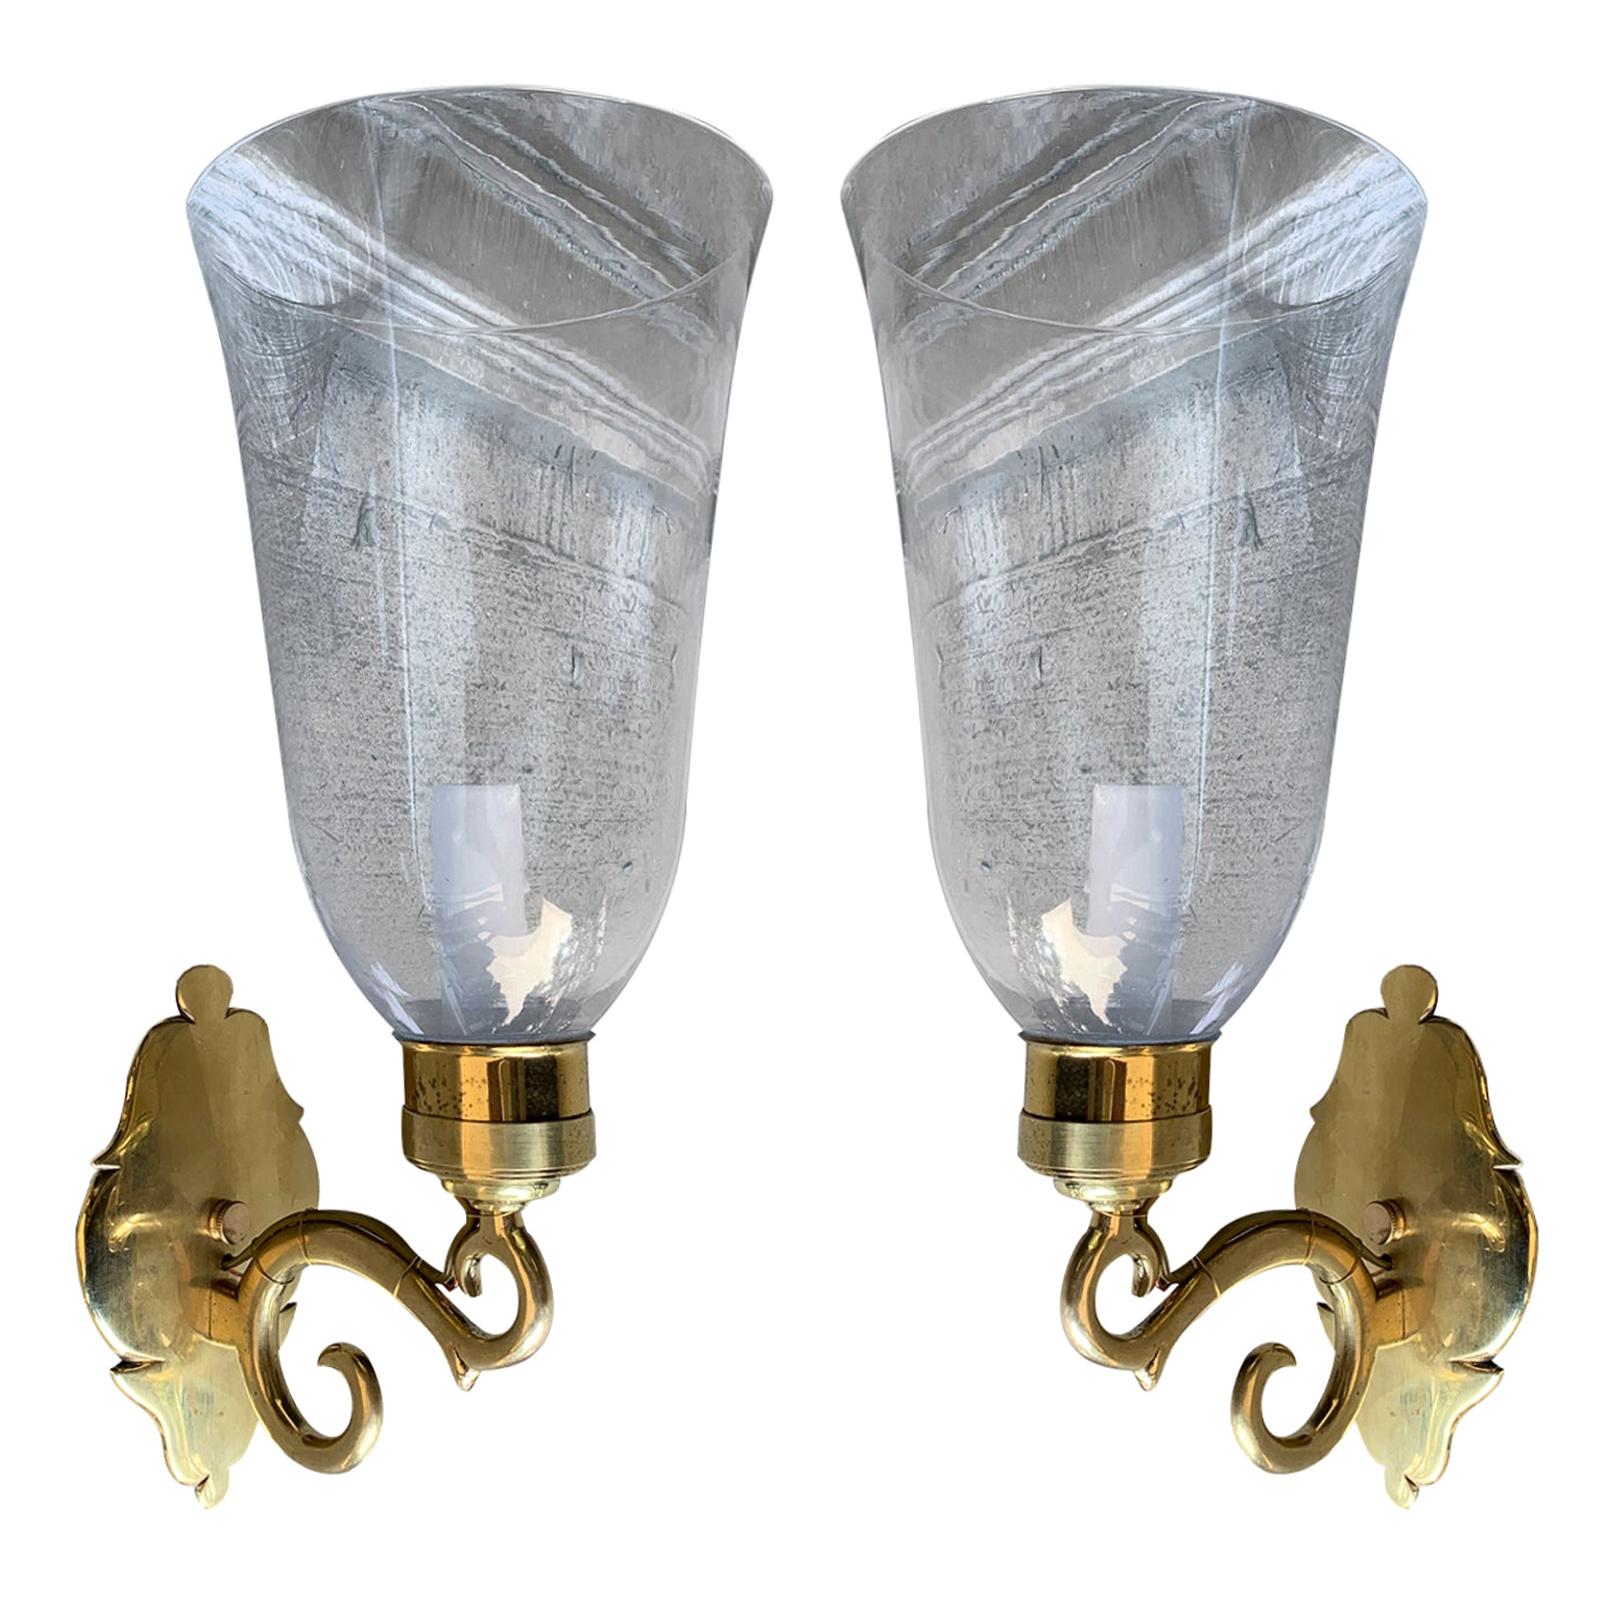 Pair of 20th Century American Brass Sconces with Hurricanes, Marked Ball & Ball